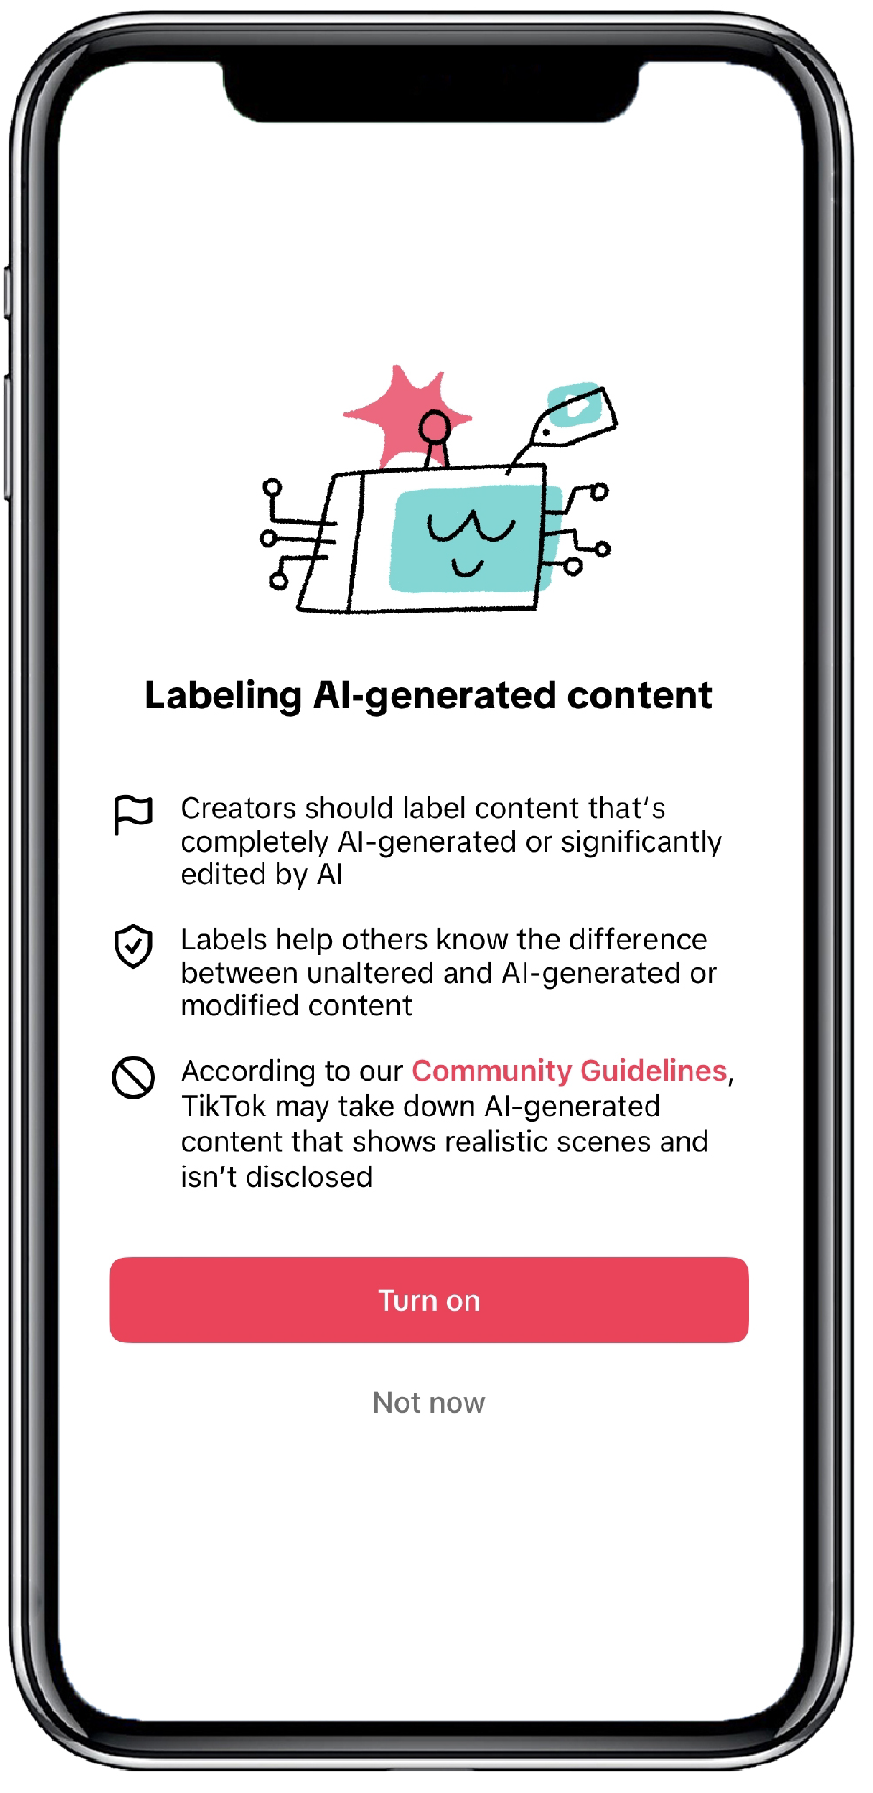 TikTok's guidelines about labeling AI generated content correctly.